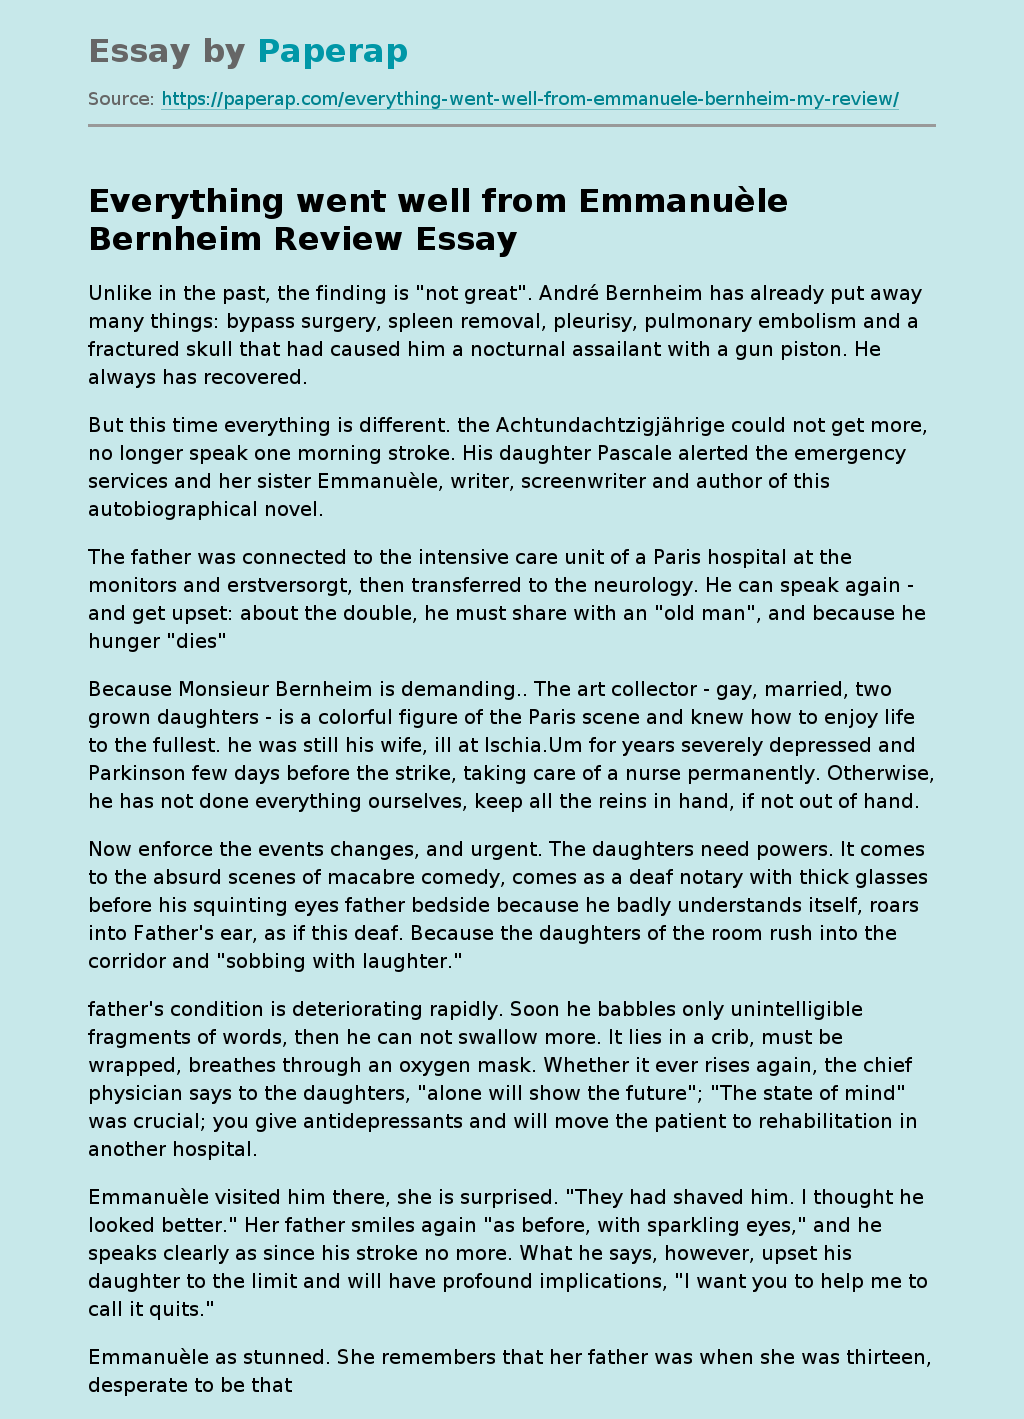 Everything went well from Emmanuèle Bernheim Review